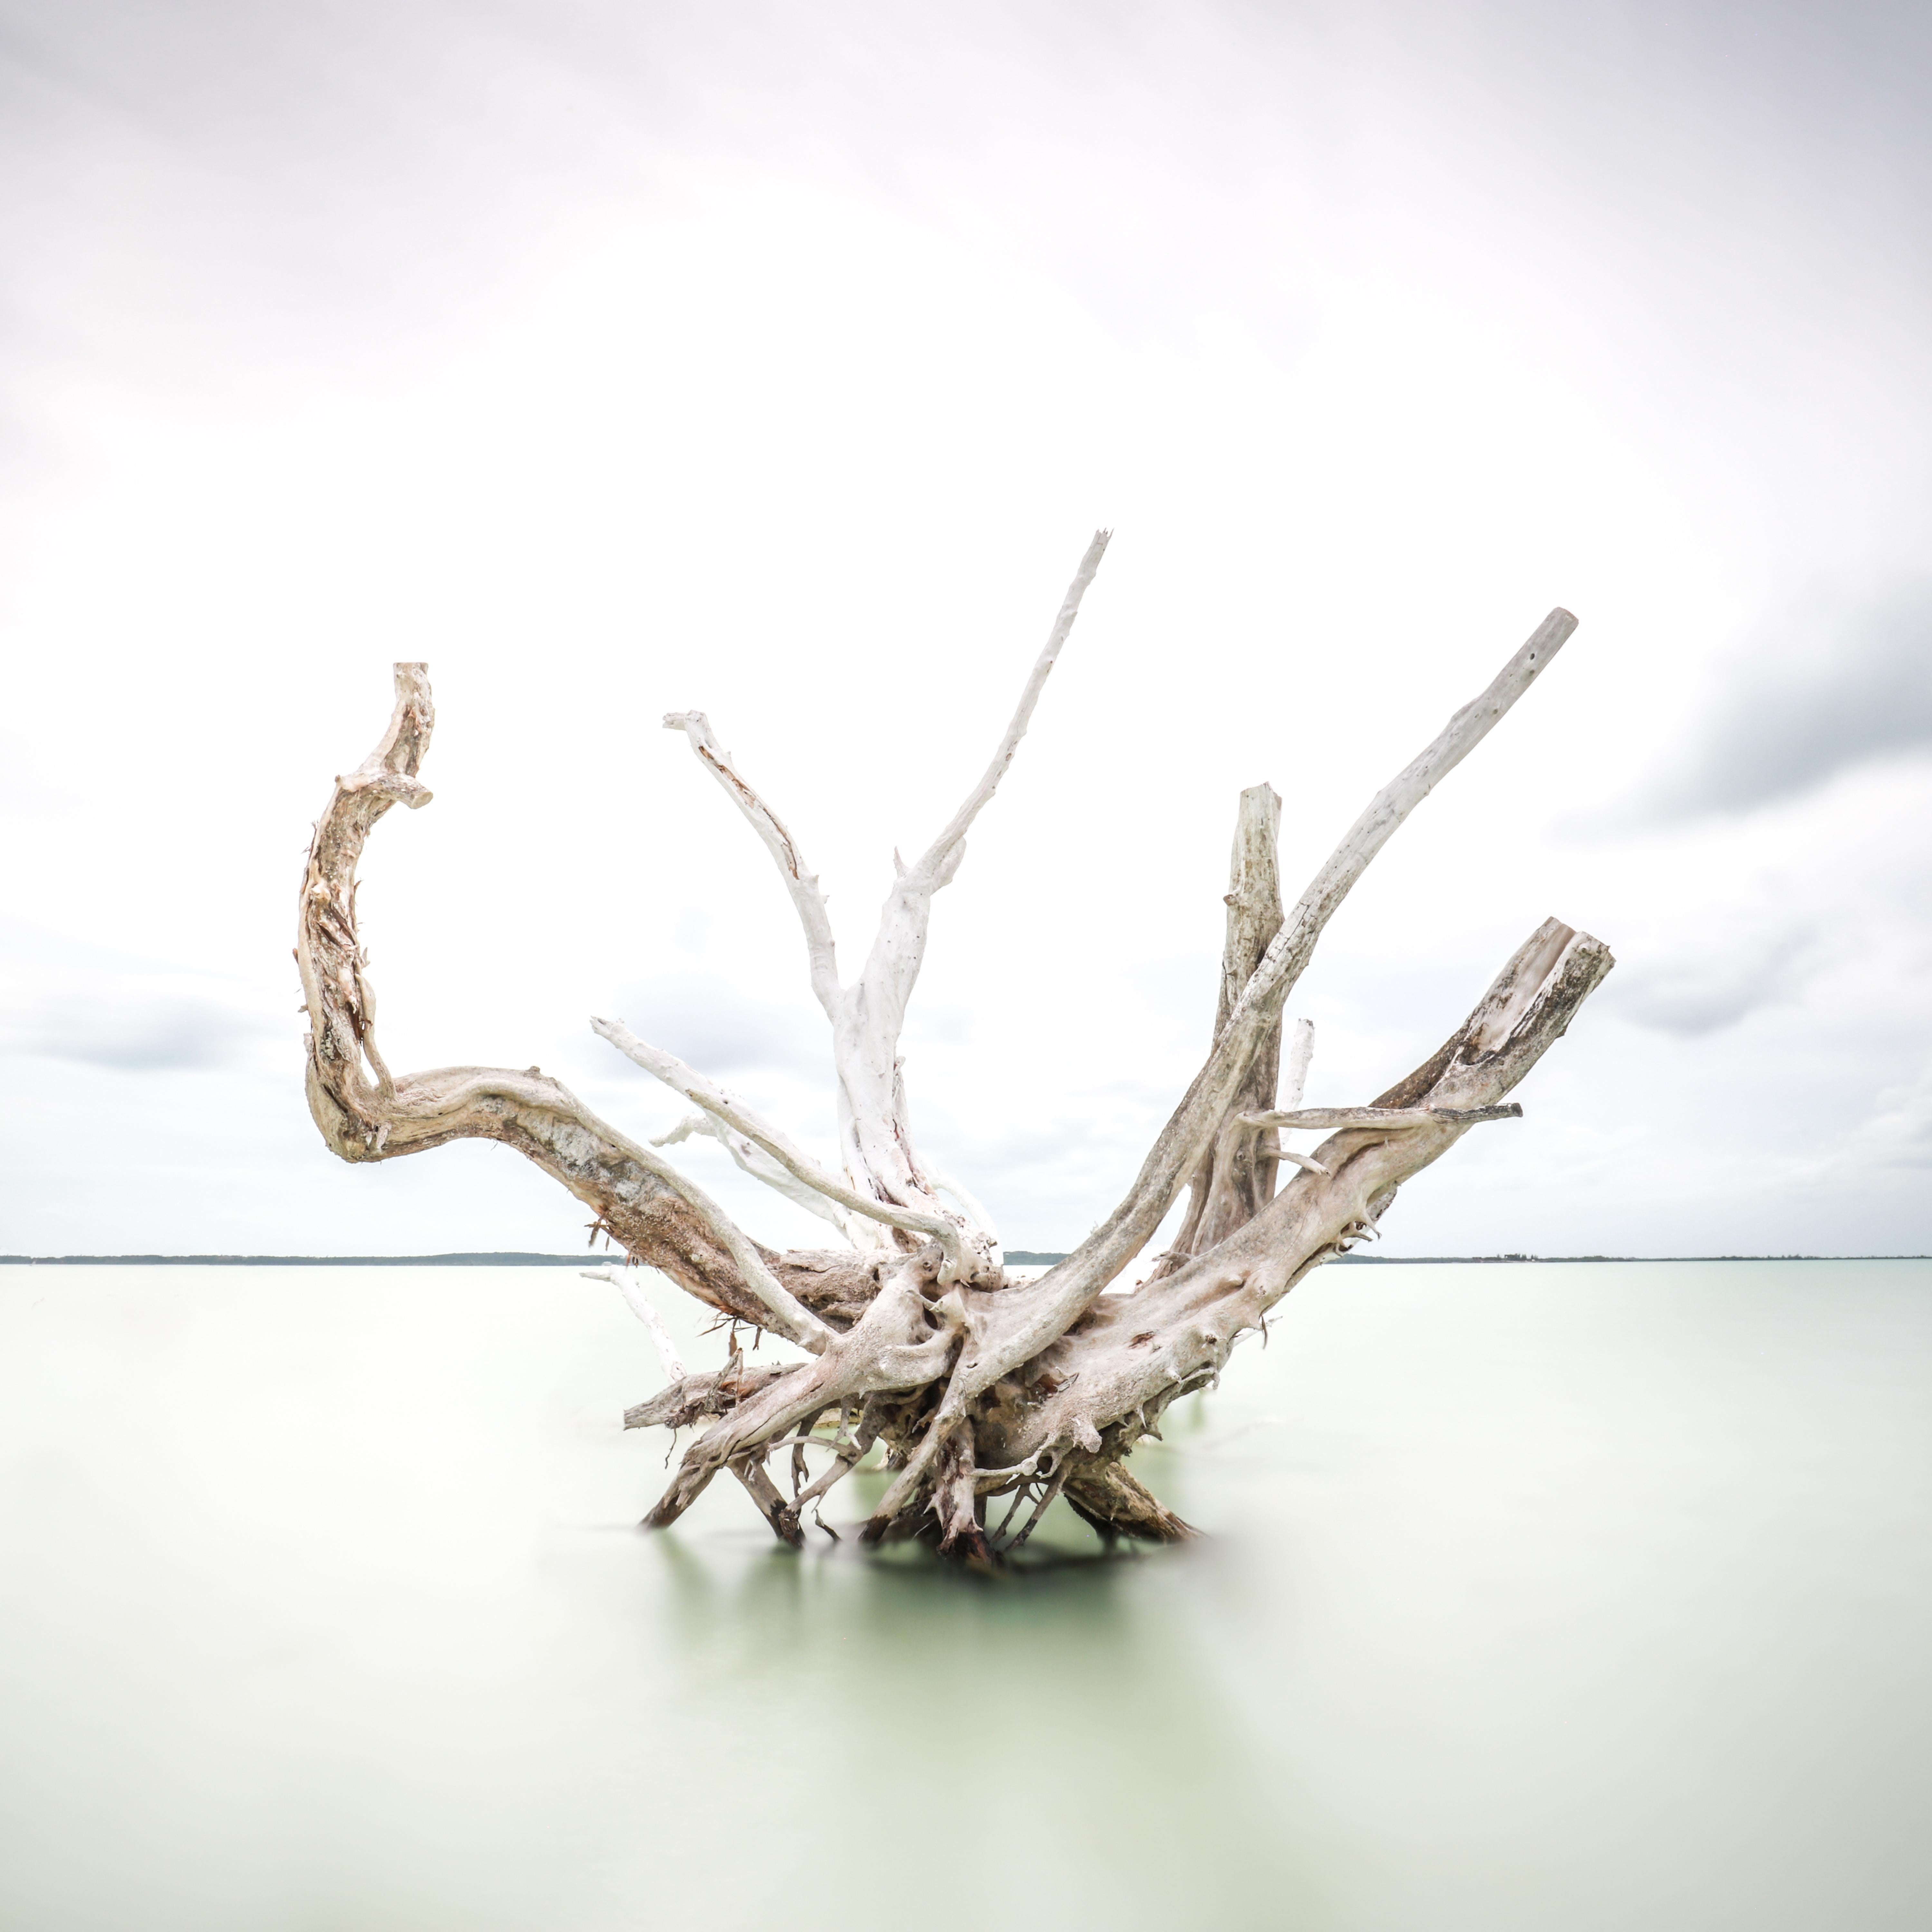 Keith Ramsdell Color Photograph – Driftwood at Harbour Island 60x60